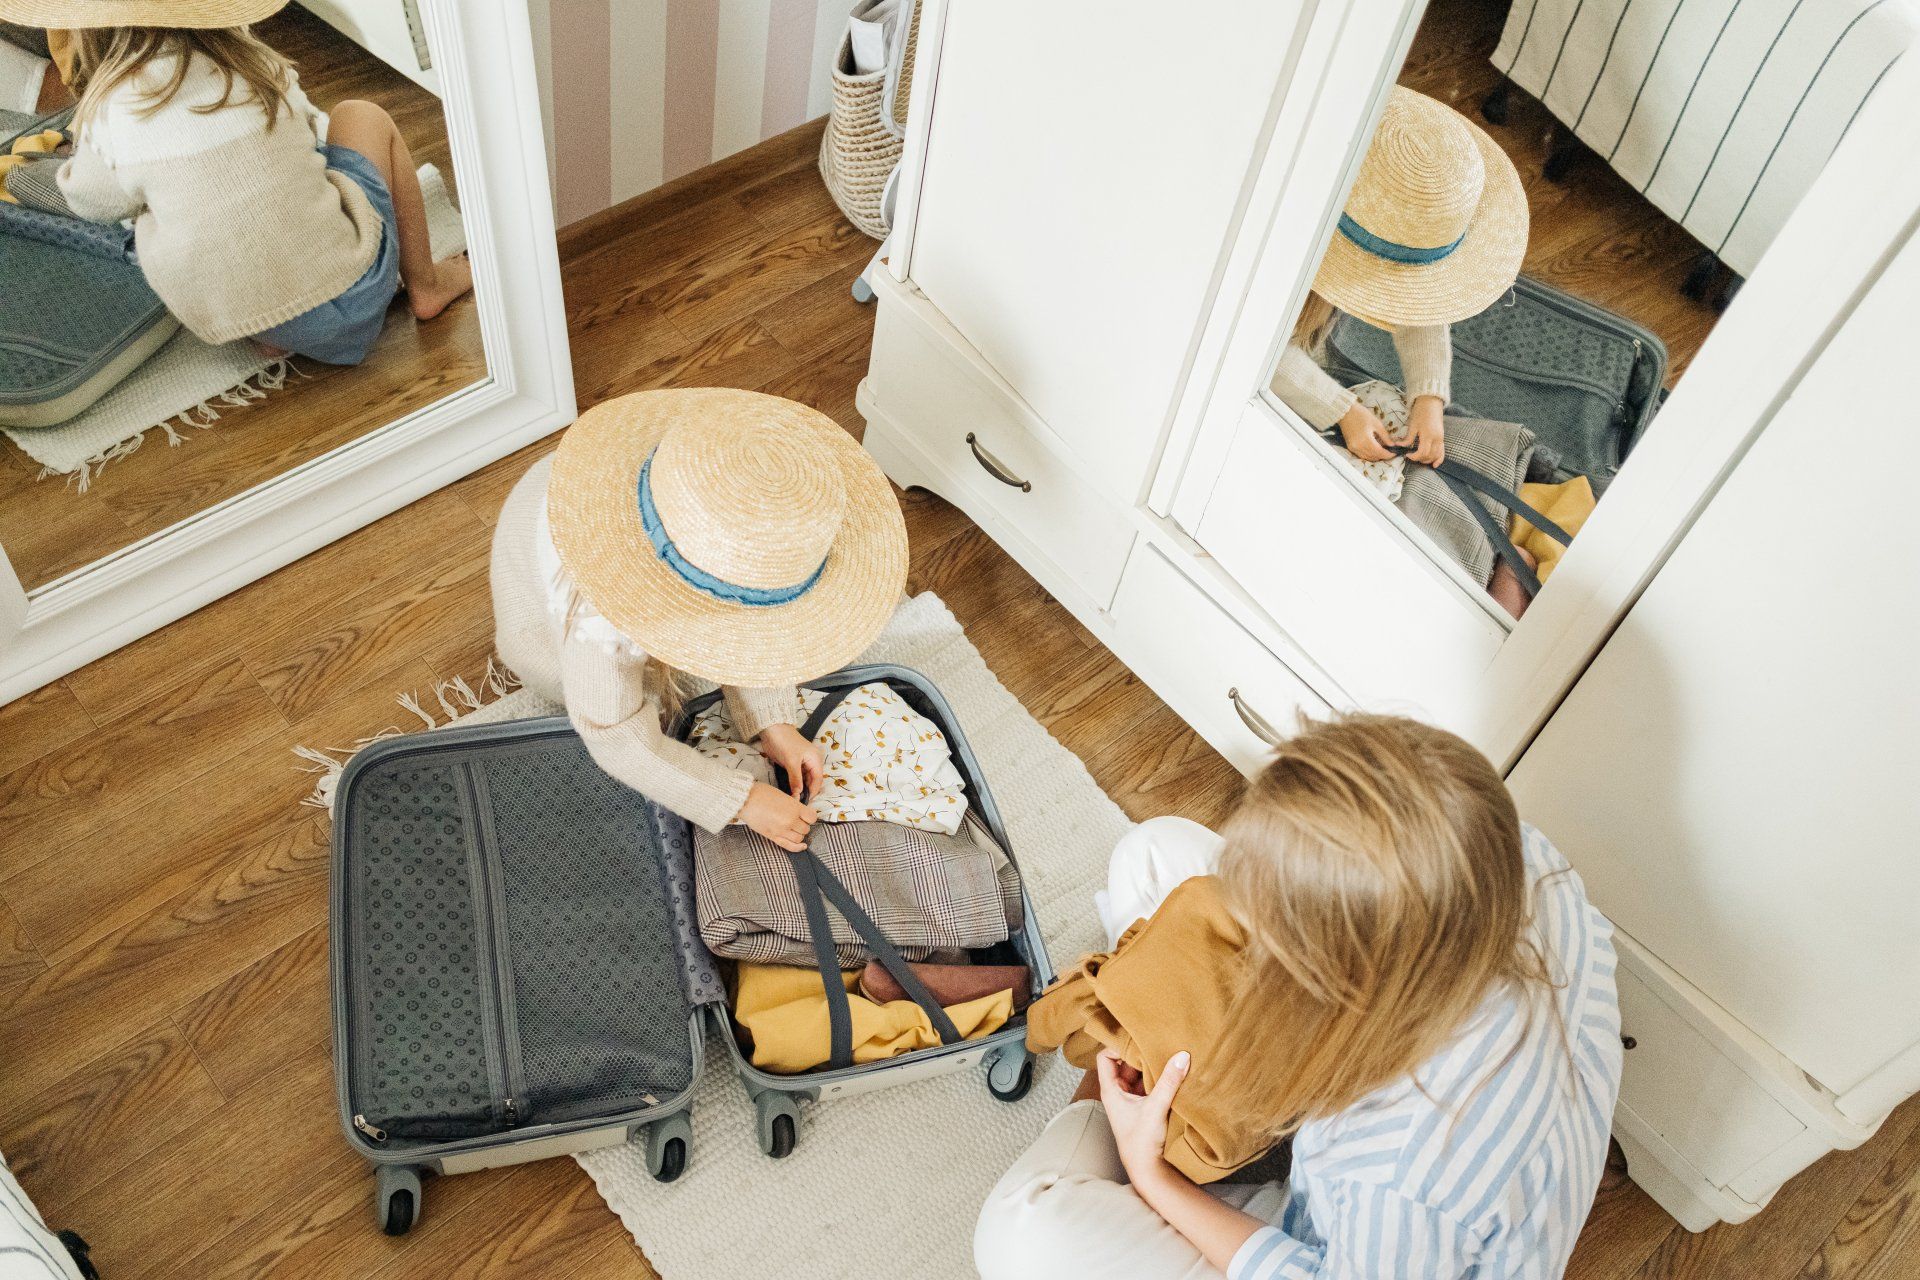 Photo by Ivan Samkov: https://www.pexels.com/photo/a-woman-and-a-child-packing-a-suitcase-4784047/